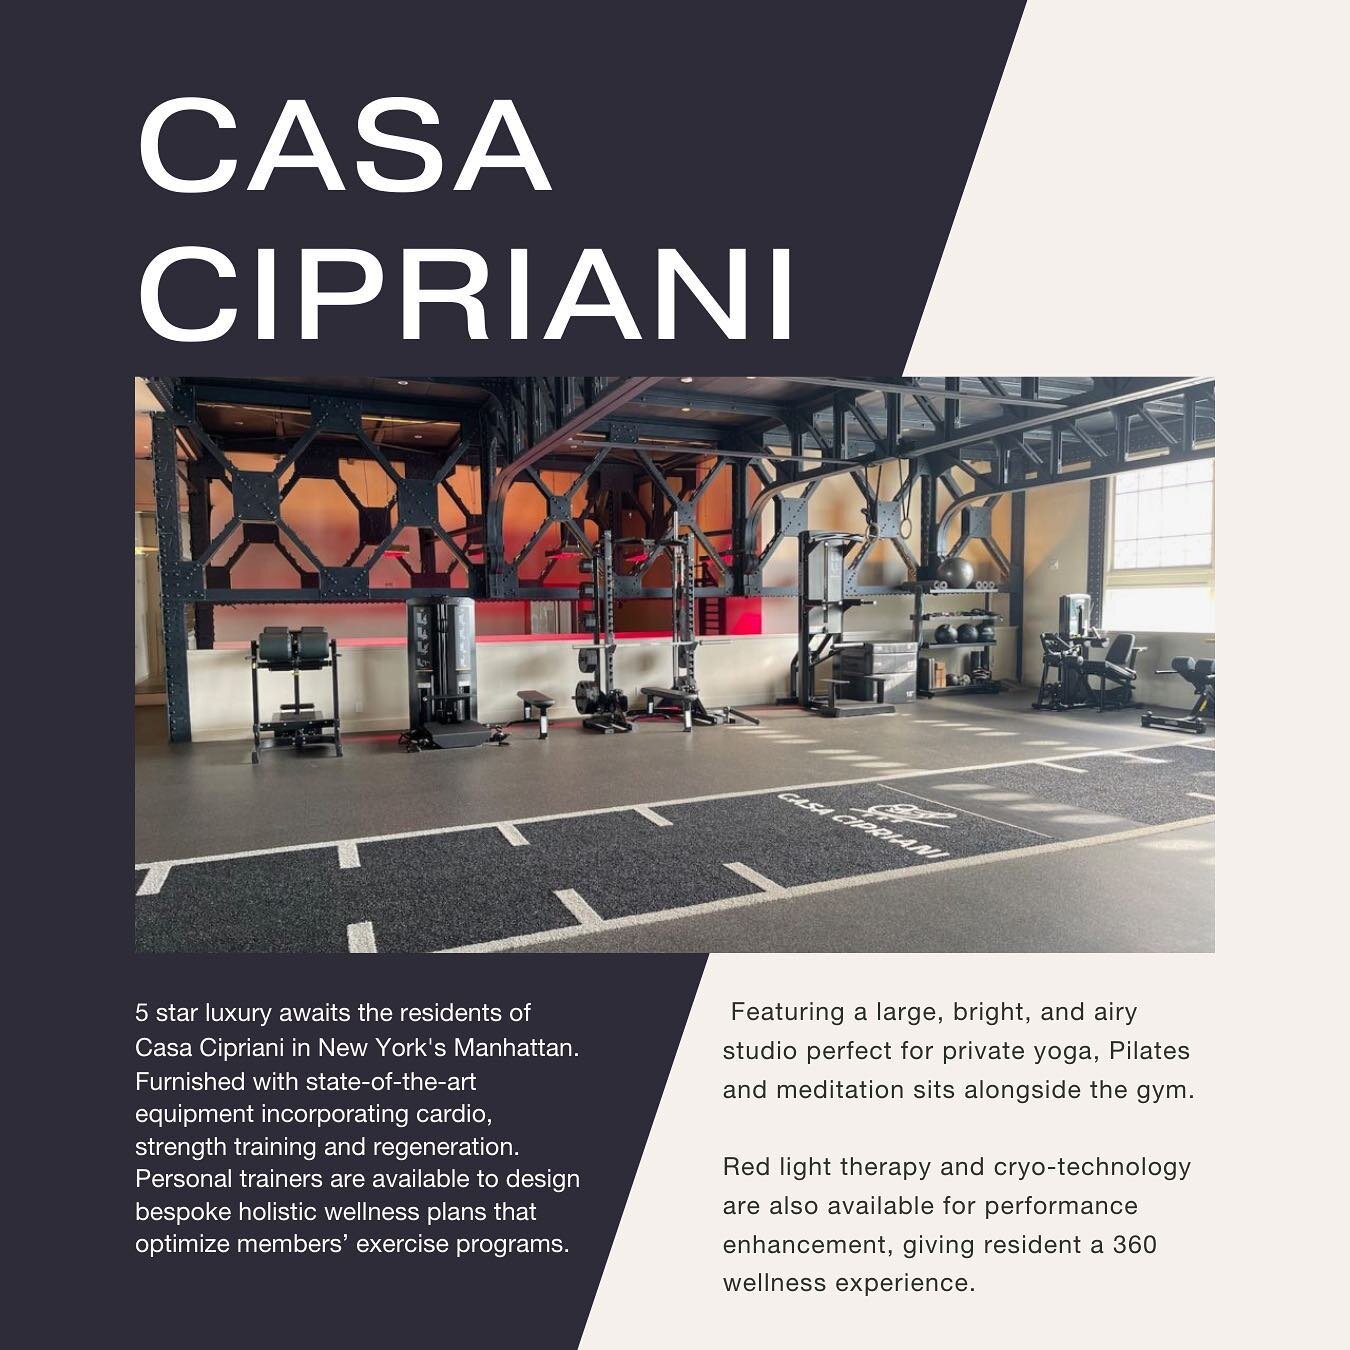 Offering intelligent health delivered in a luxury setting, the gym at the prestigious Casa Cipriani, New York is a haven of health nestled within the bustling city. 

Featuring beautiful architectural details and tons of natural light, we worked to c